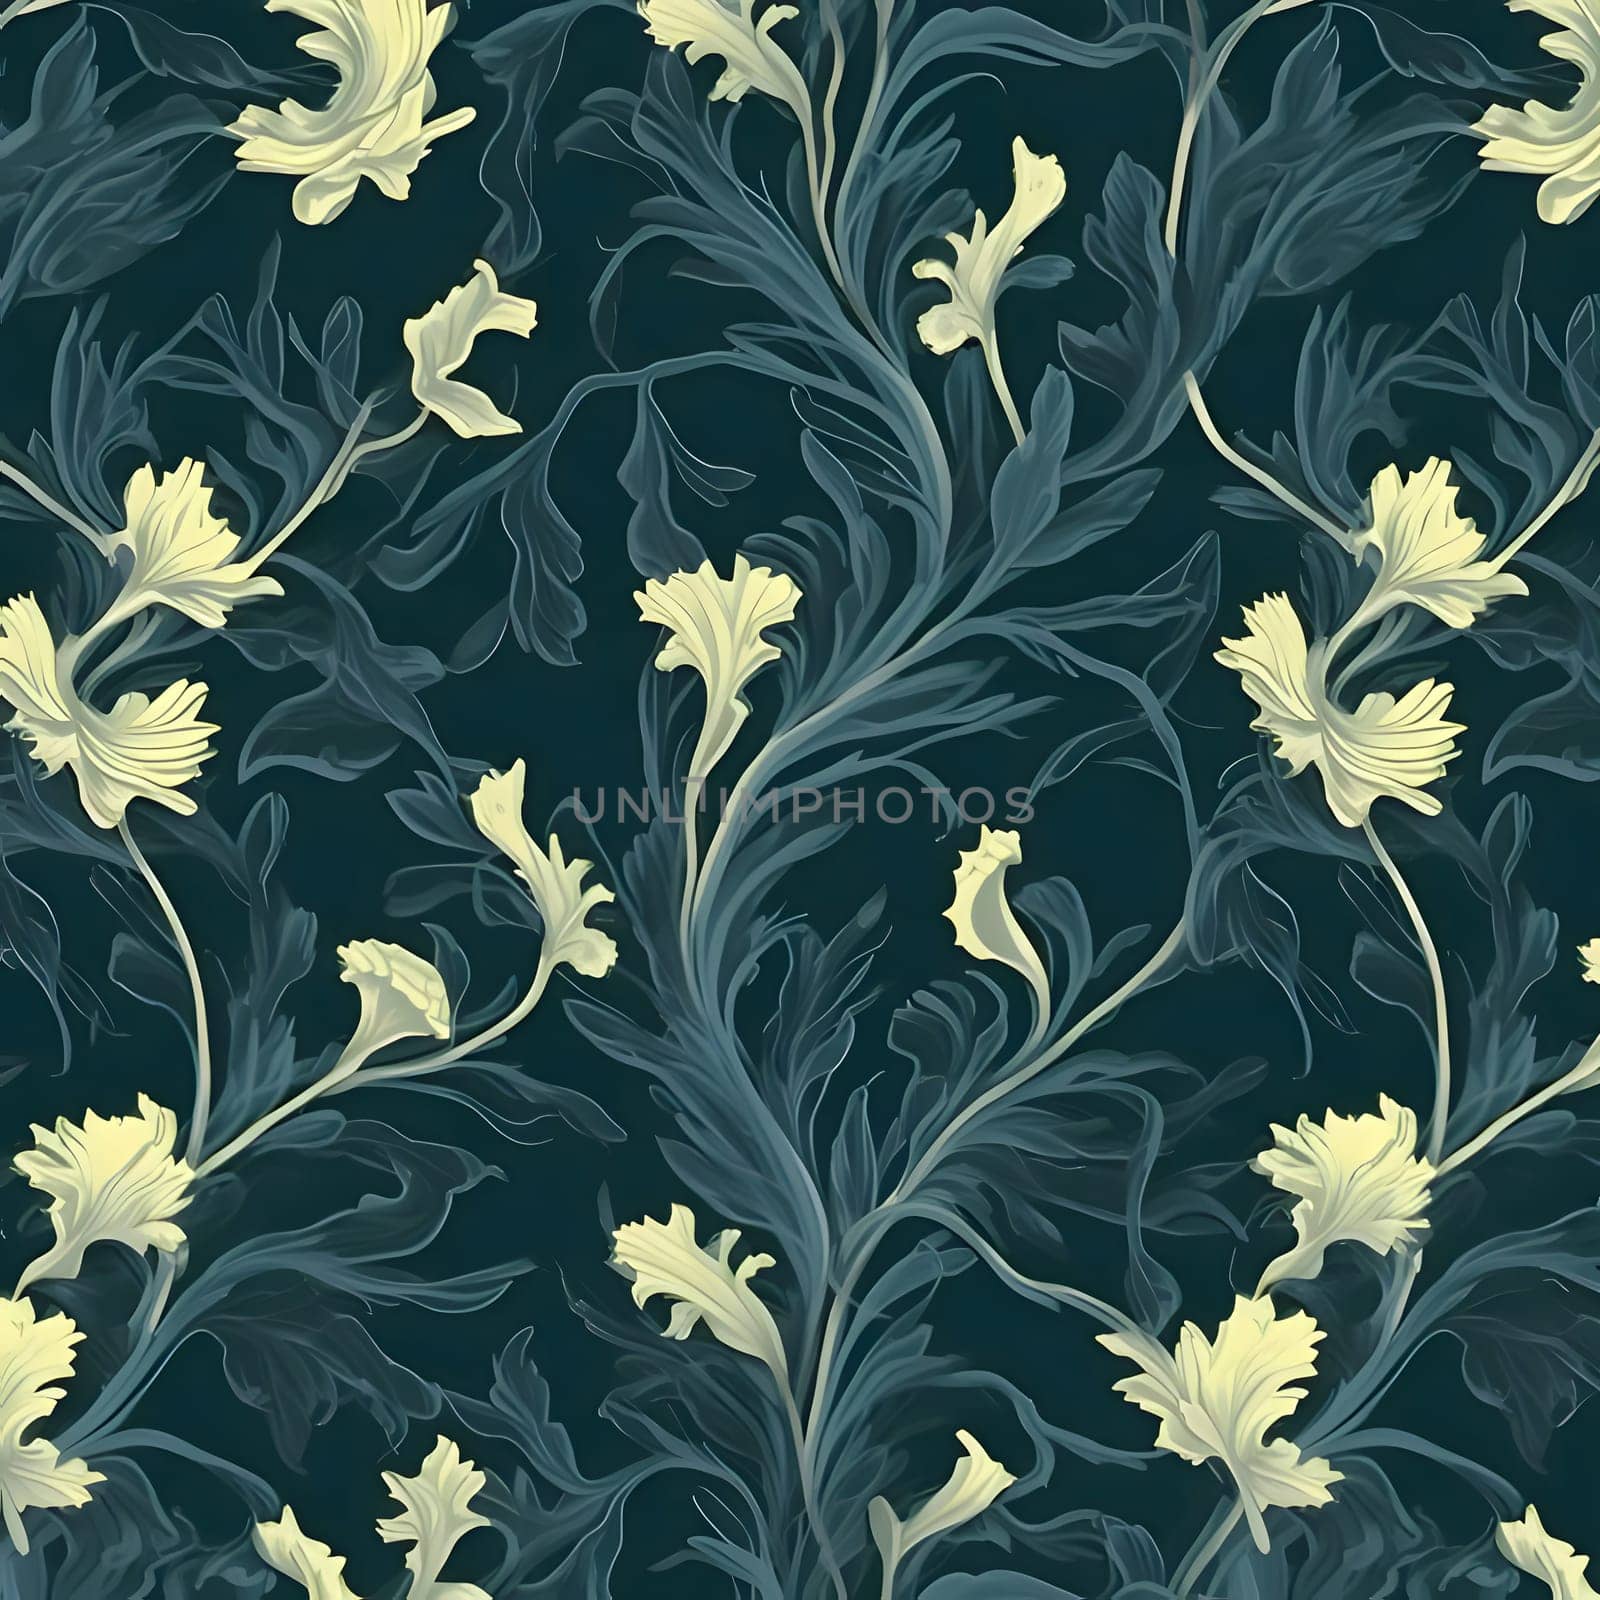 Patterns and banners backgrounds: Seamless floral pattern with yellow flowers on a dark blue background